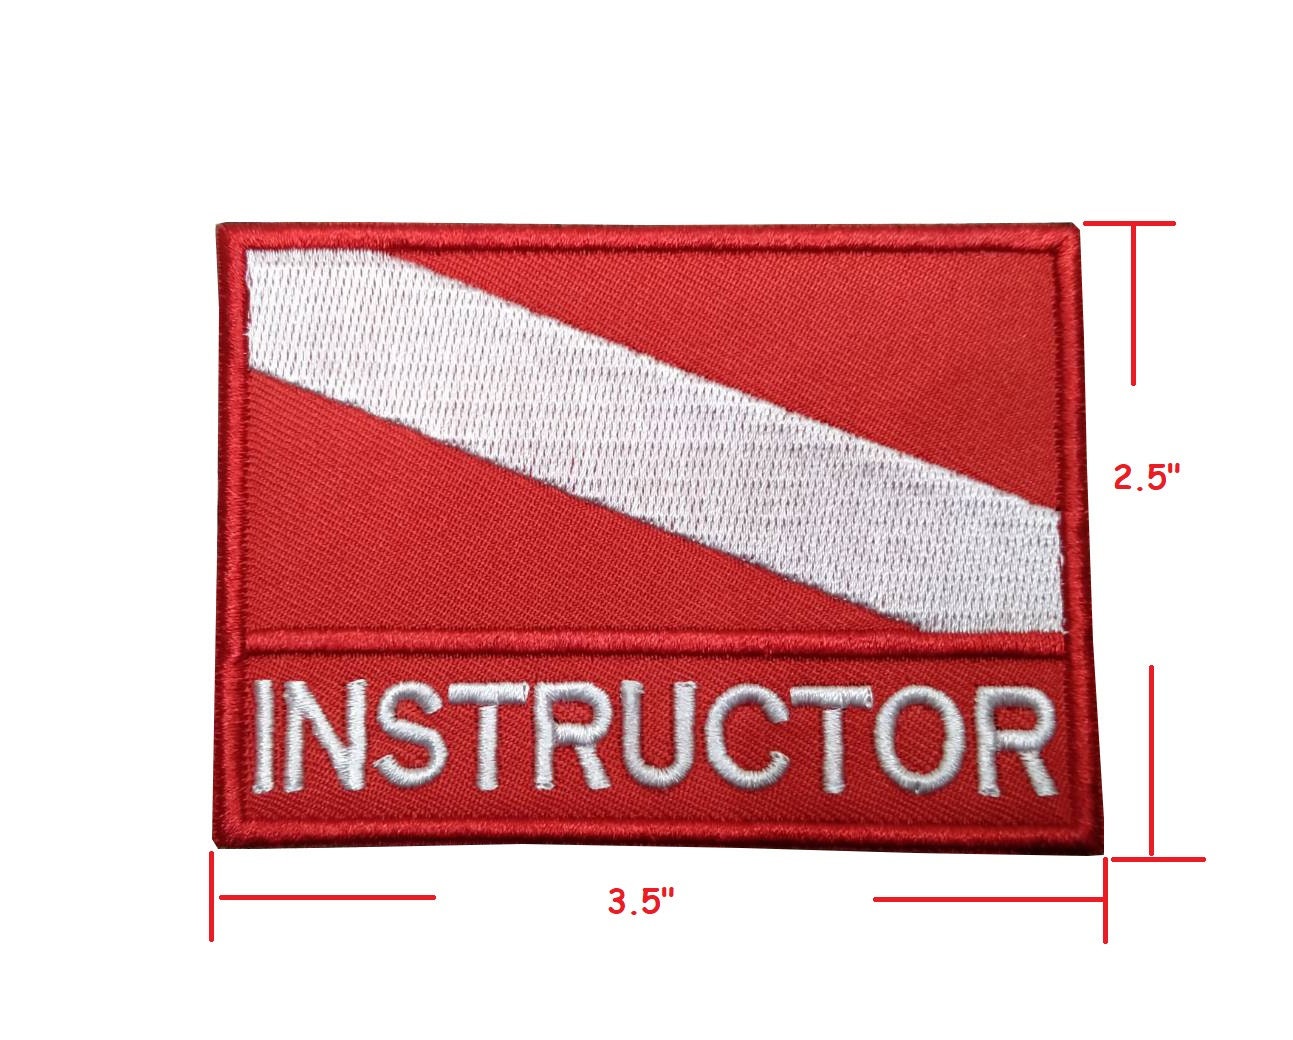 Buy Instructor Patch Online In India -  India